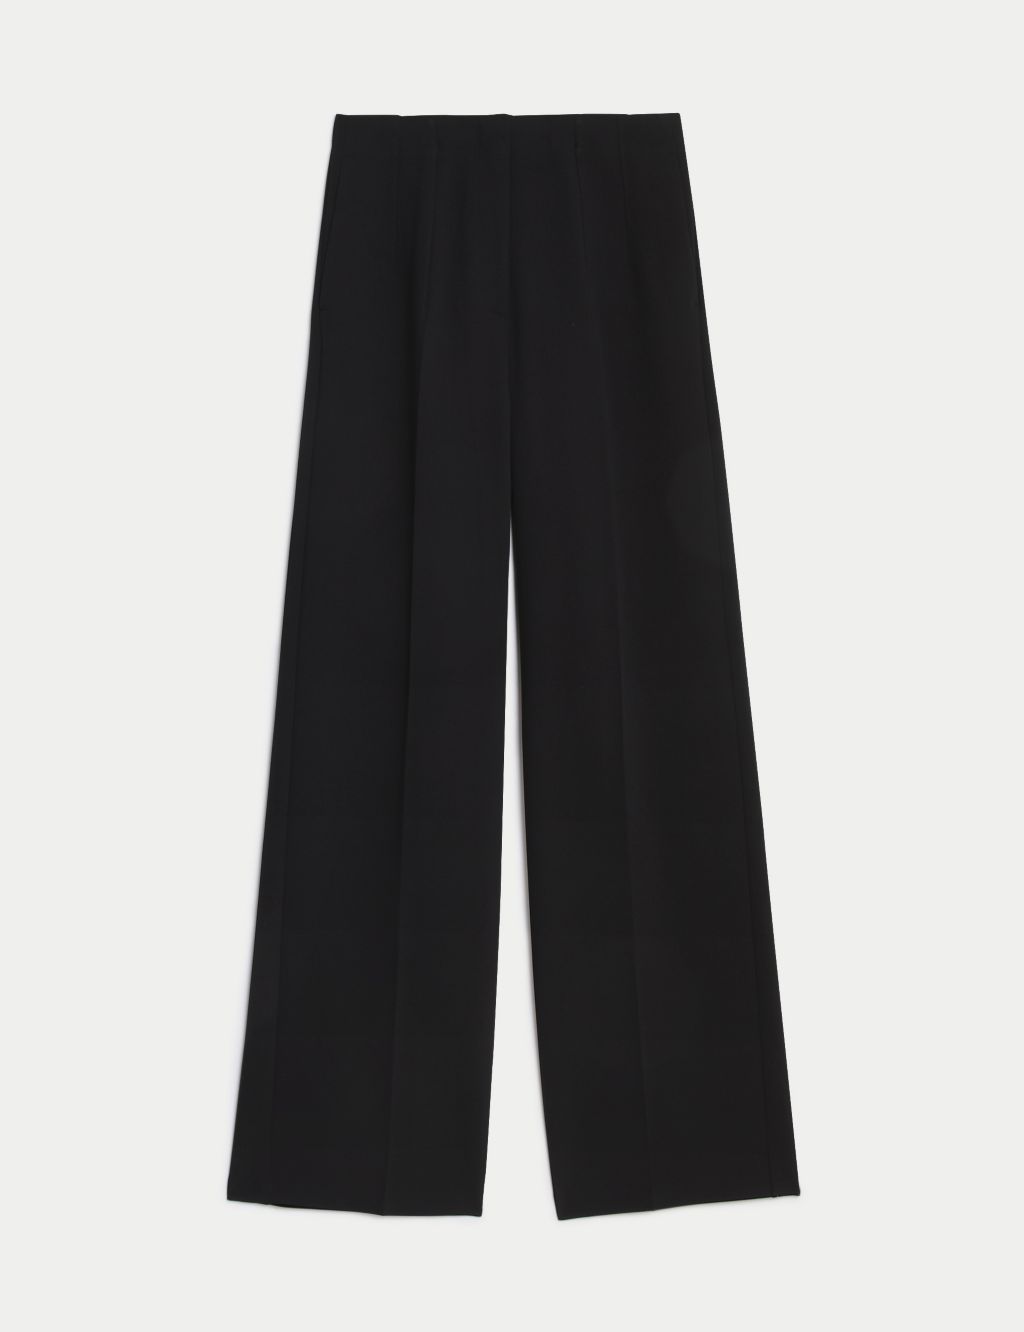 Woven Elasticated Waist Wide Leg Trousers | M&S Collection | M&S